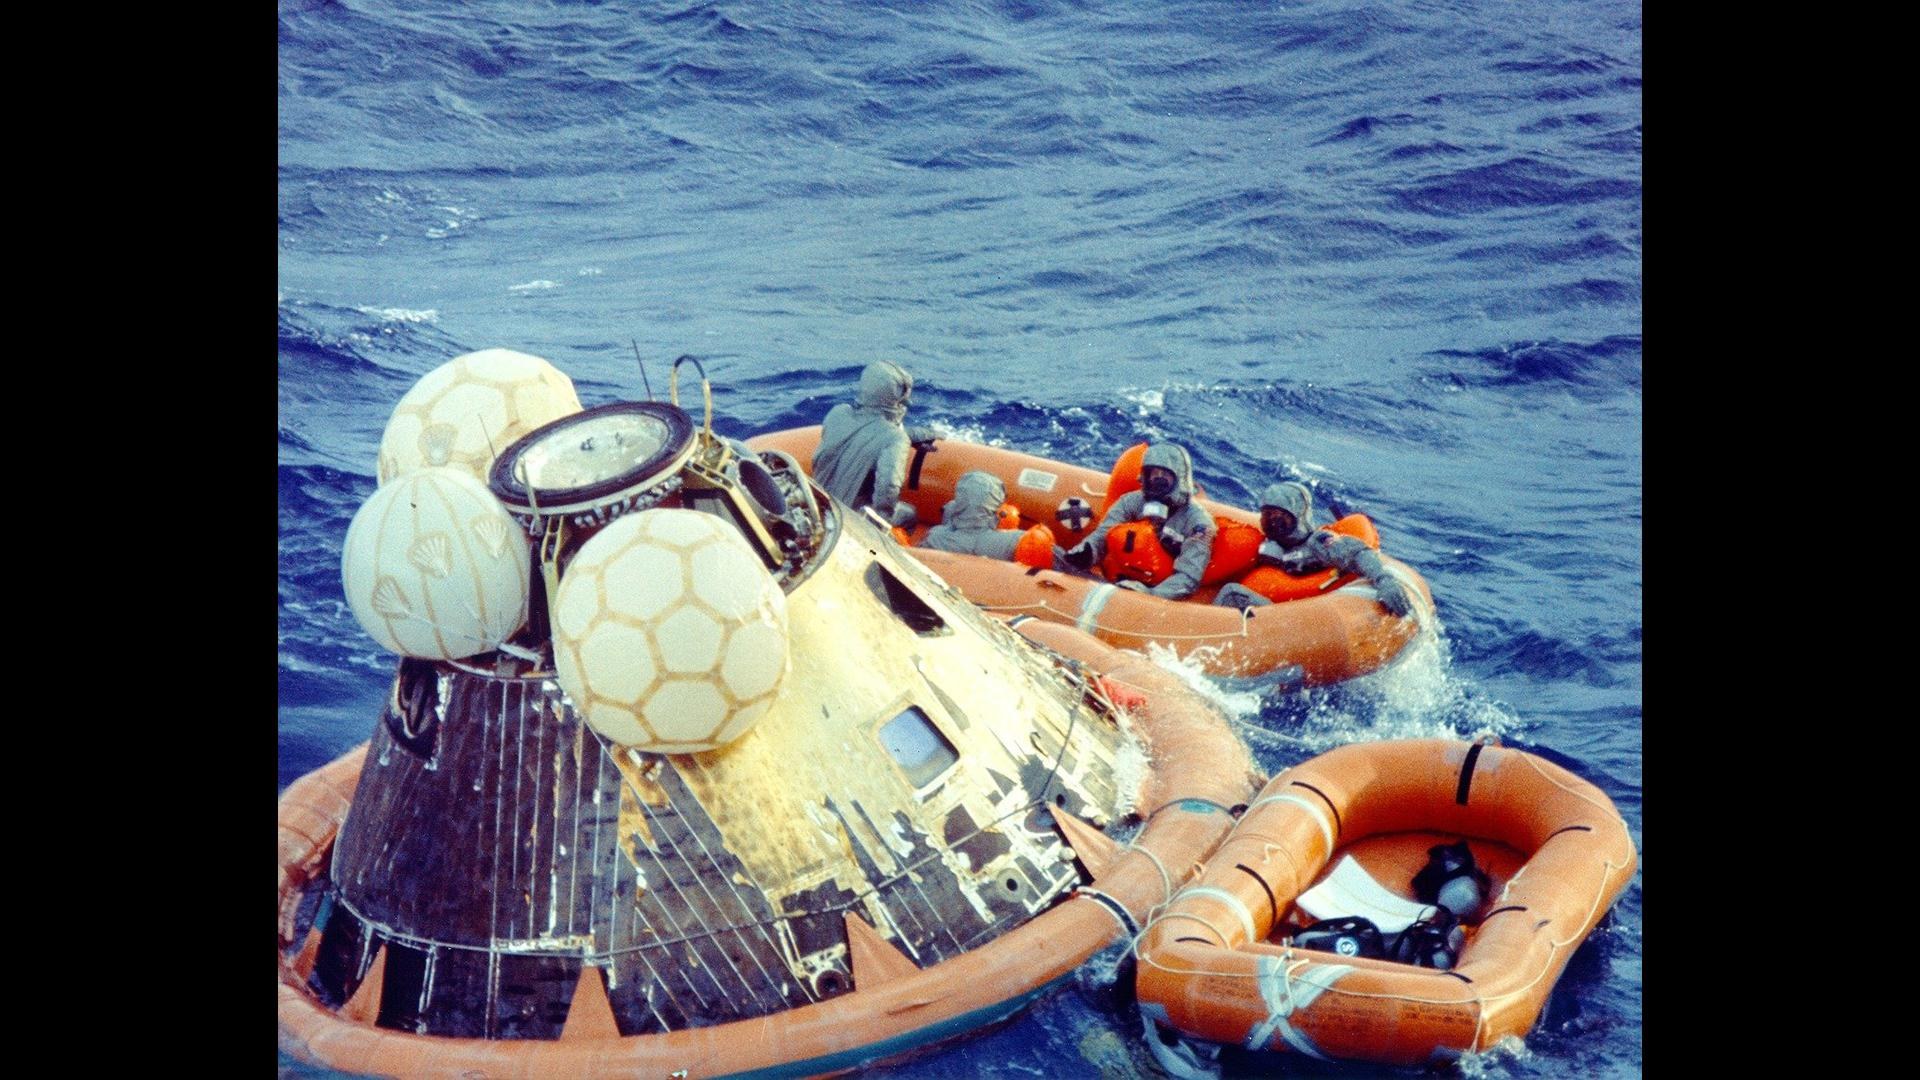 The Apollo 11 Command Module with the three astronauts on board splashed down in the western Pacific Ocean.